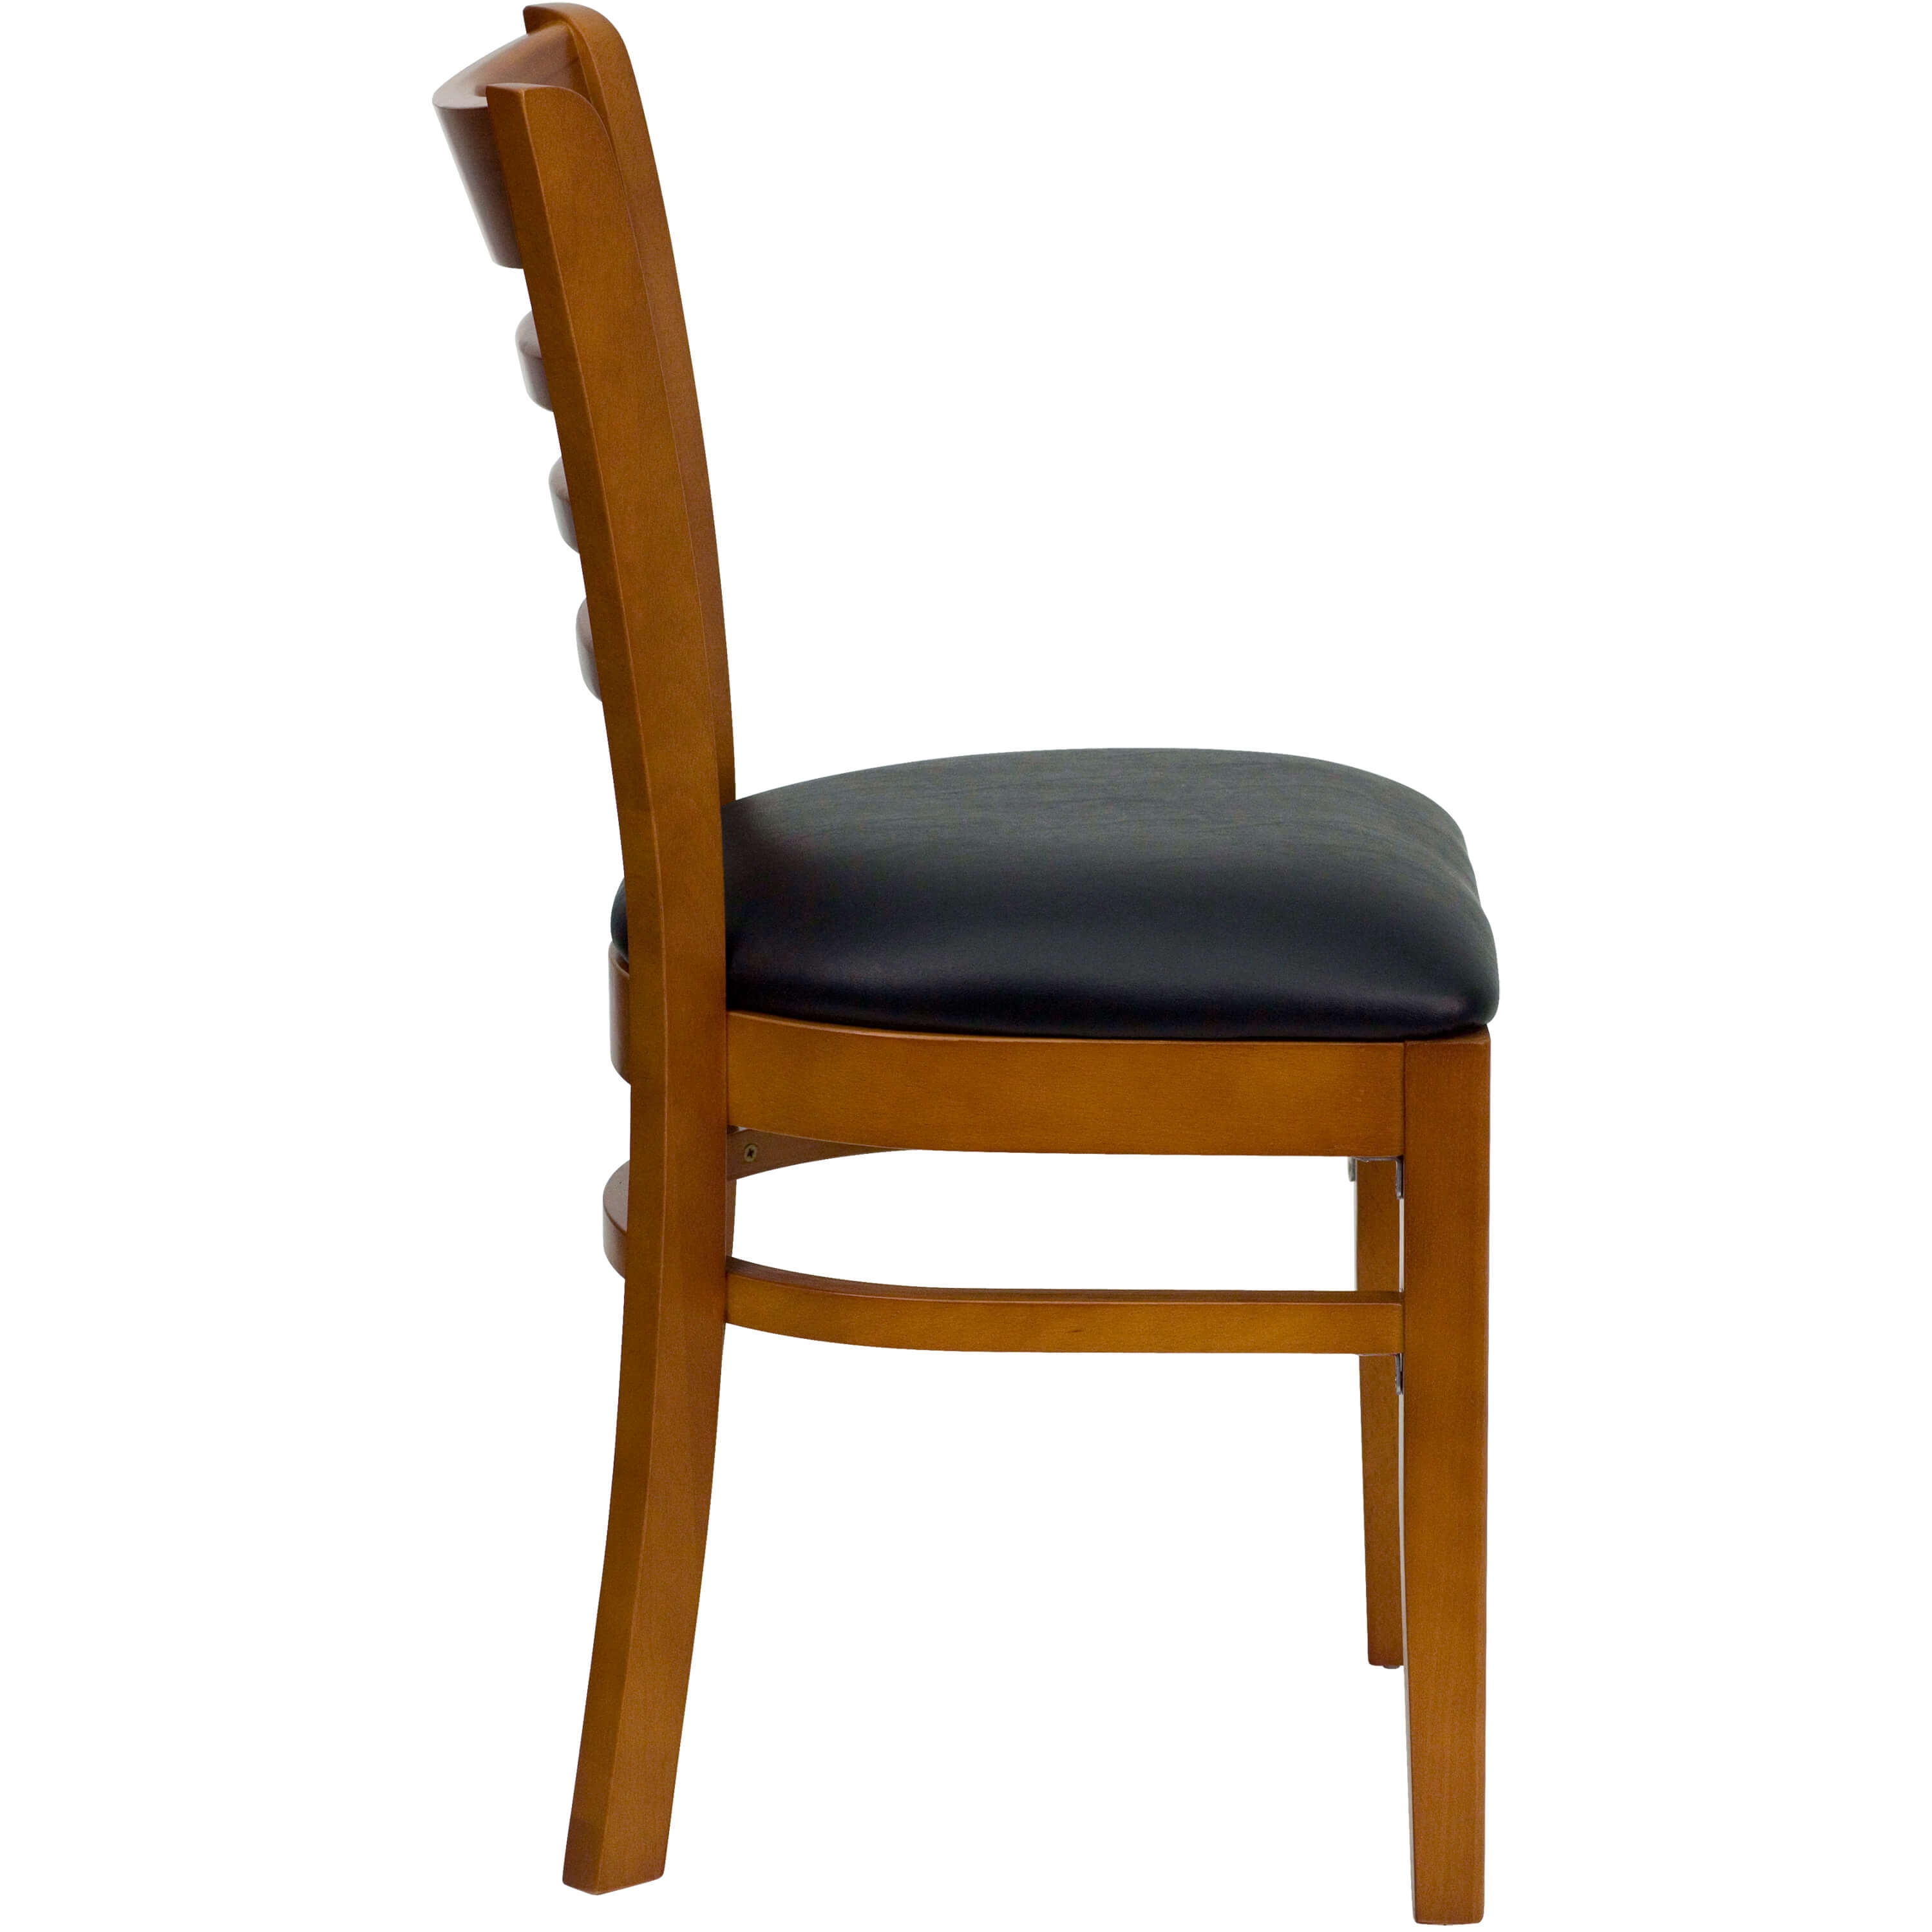 Ladder back wooden dining chair side view